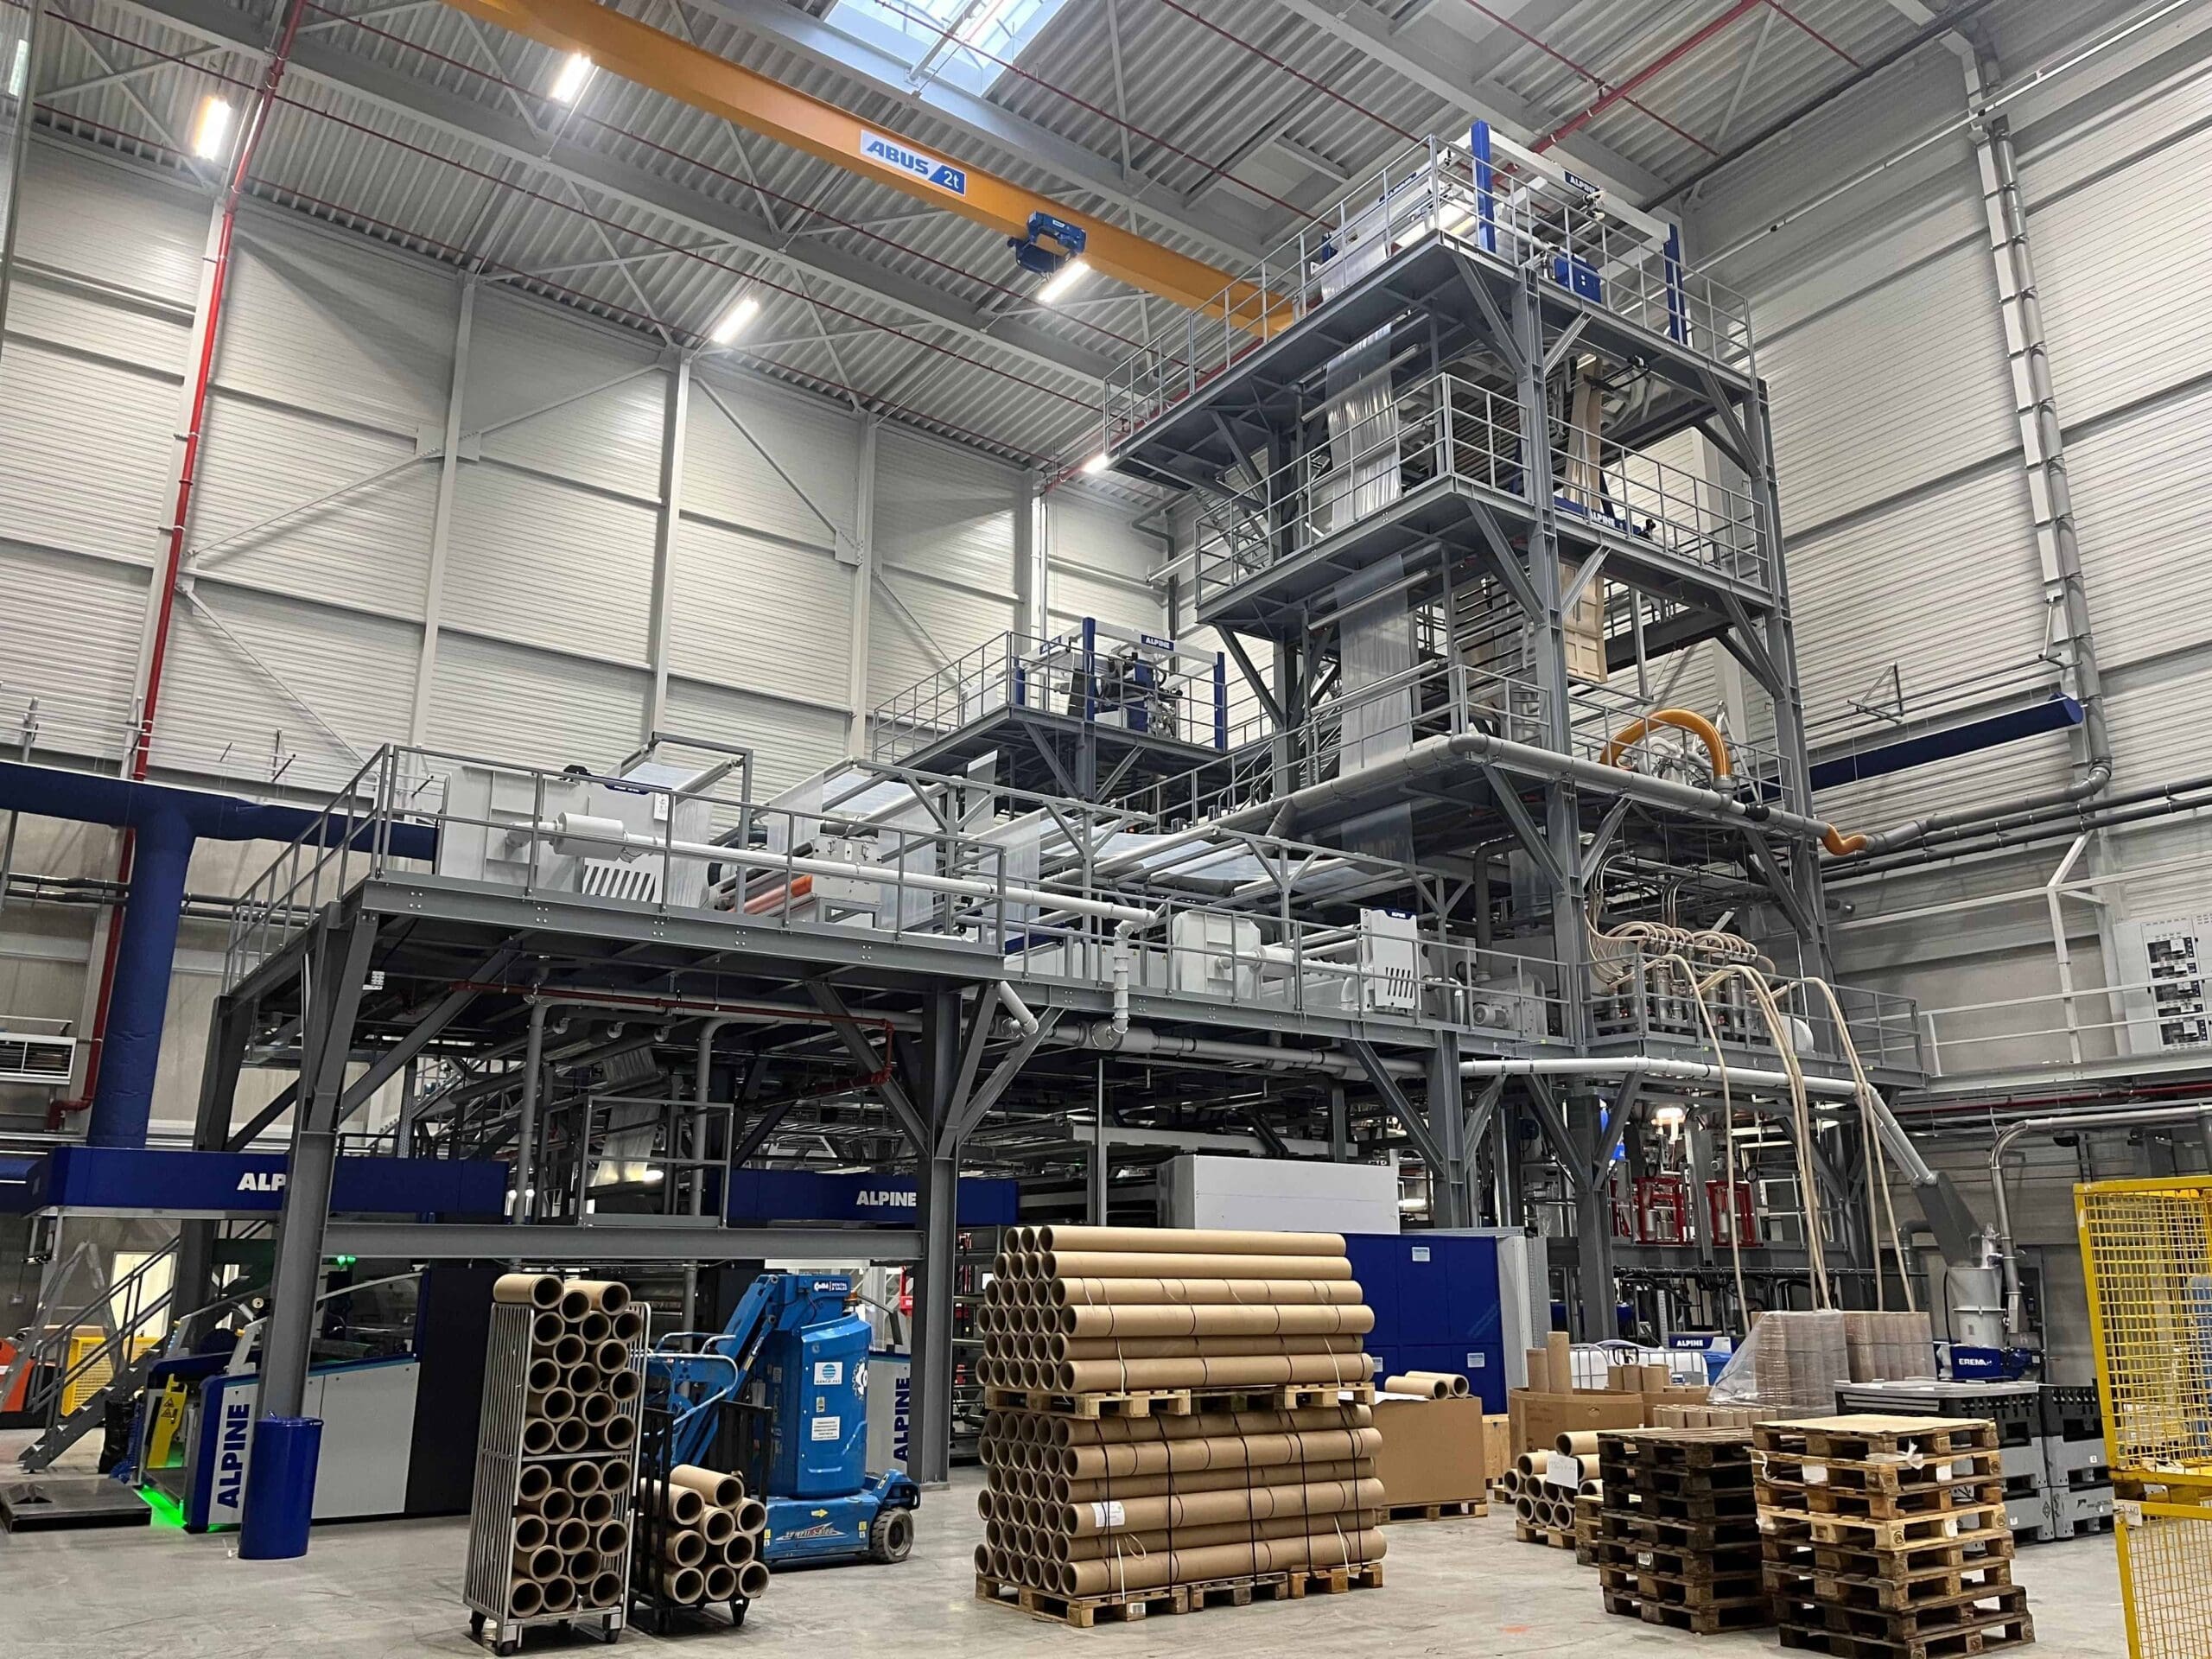 OERLEMANS SPECIFIES VETAPHONE FOR ITS NEW EXTRUSION LINES